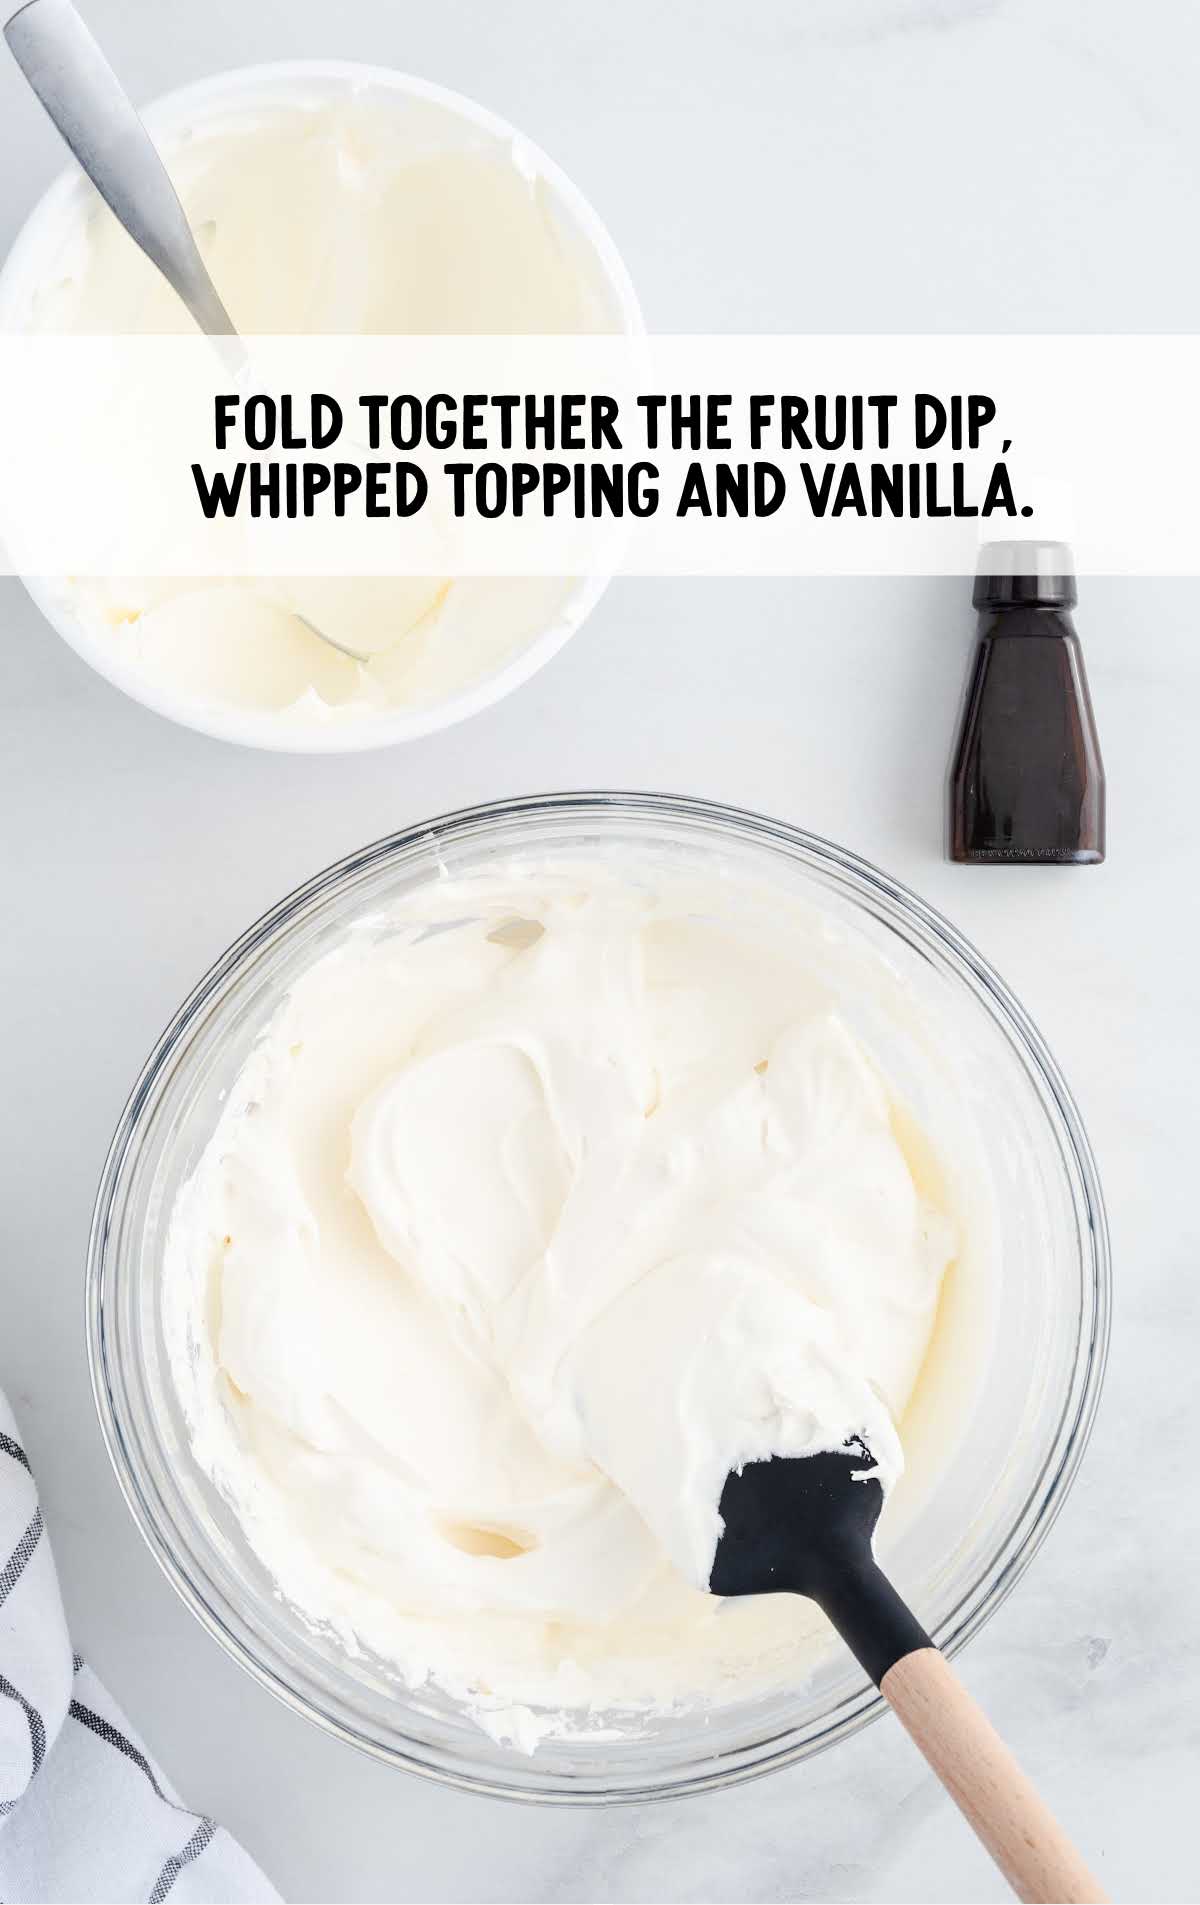 fruit dip, whipped topping and vanilla folded in a bowl